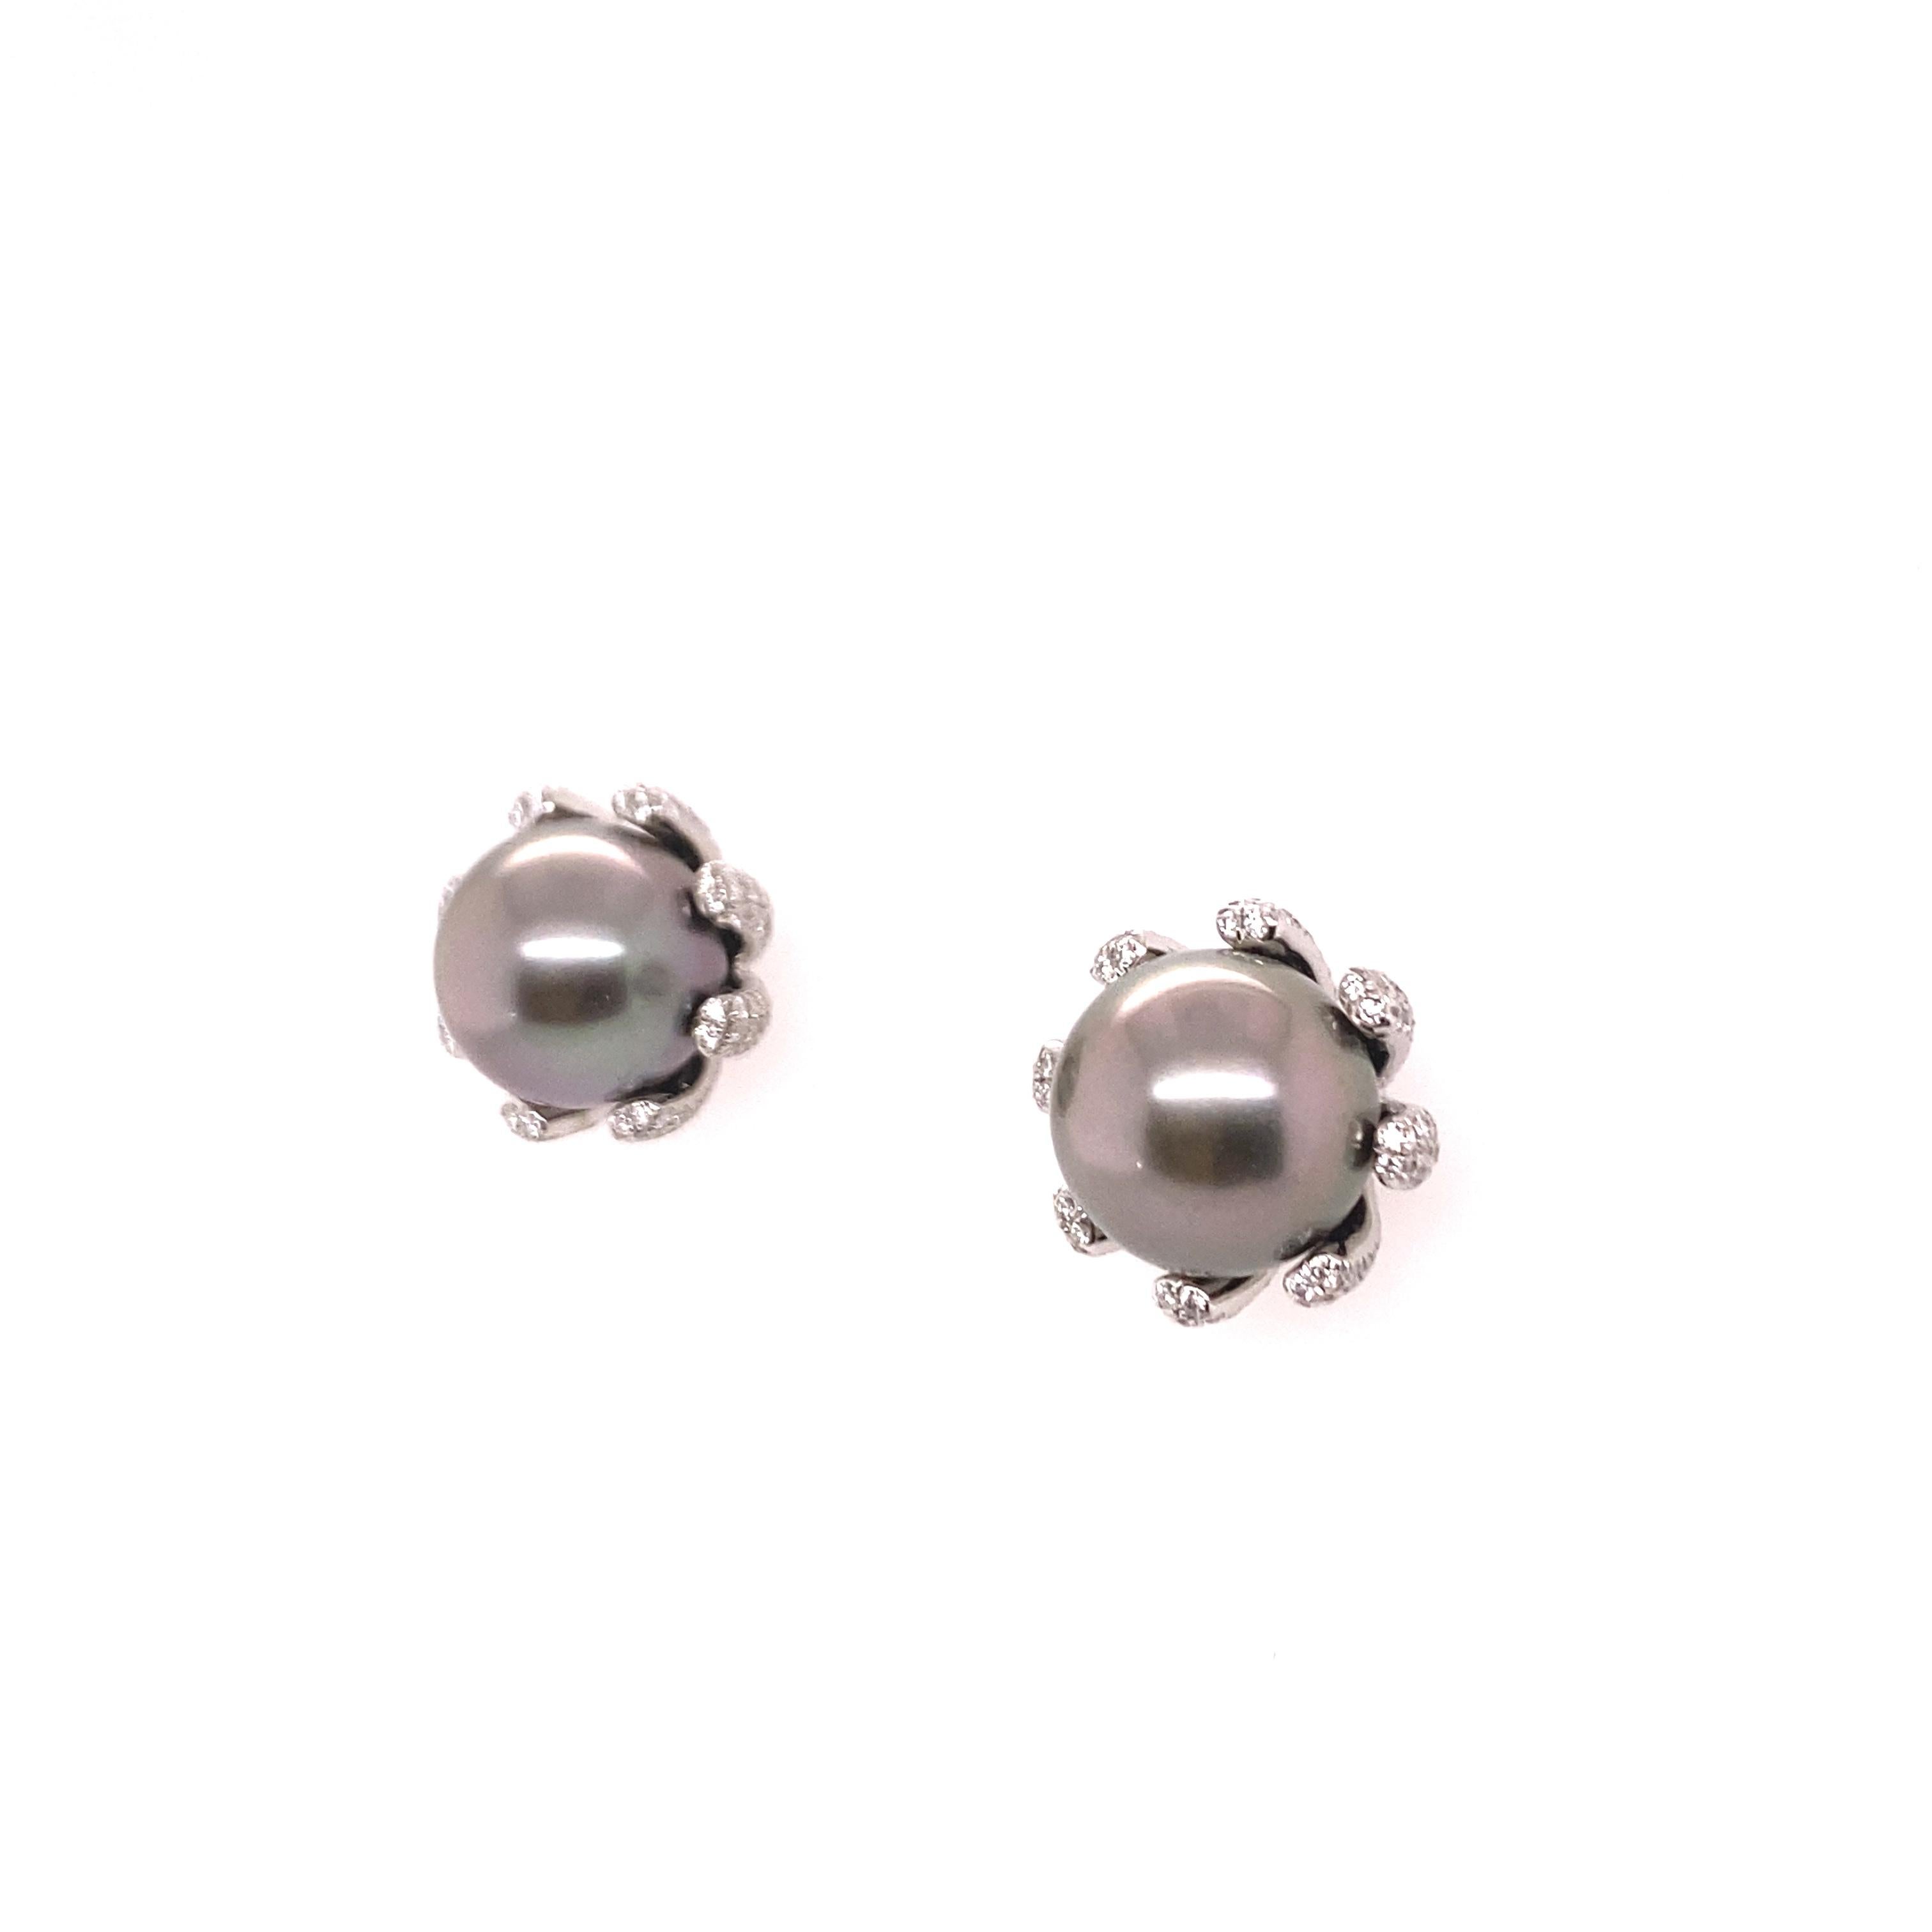 Gorgeous pair of ear studs manufactured in 18 karat white gold centering each one Tahitian Cultured Pearl of 10.0 and 10.5mm in diameter. The pearls are of perfectly round shapes with a medium dark-gray bodycolor and slight pink overtones. The